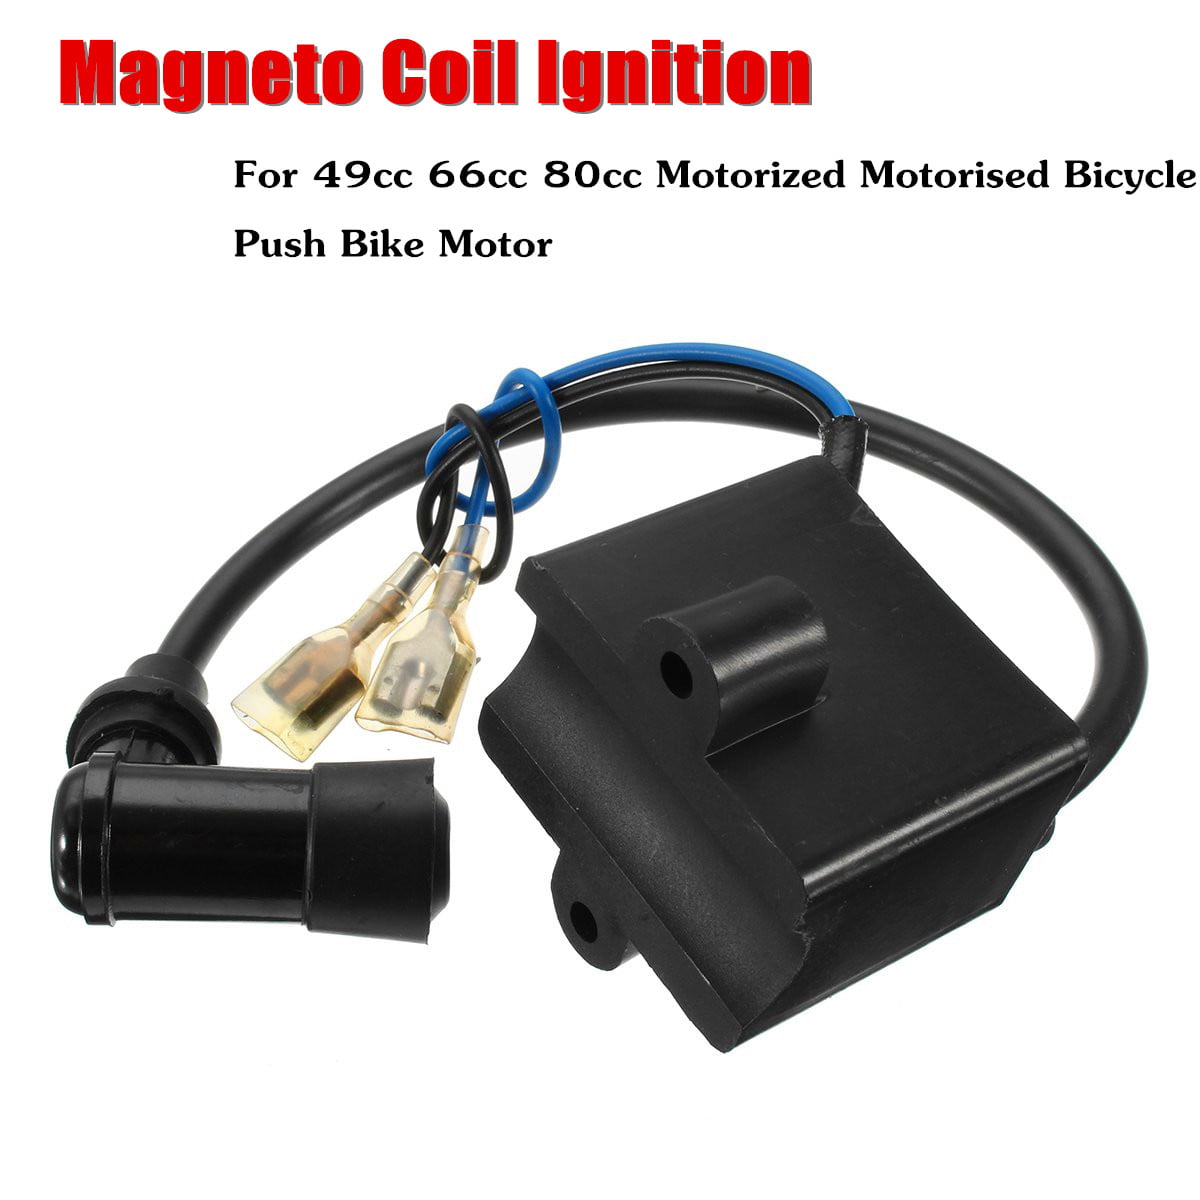 CDI Ignition Magneto Coil for 49 50cc 66cc 80cc Motor Motorized Bicycle Parts US